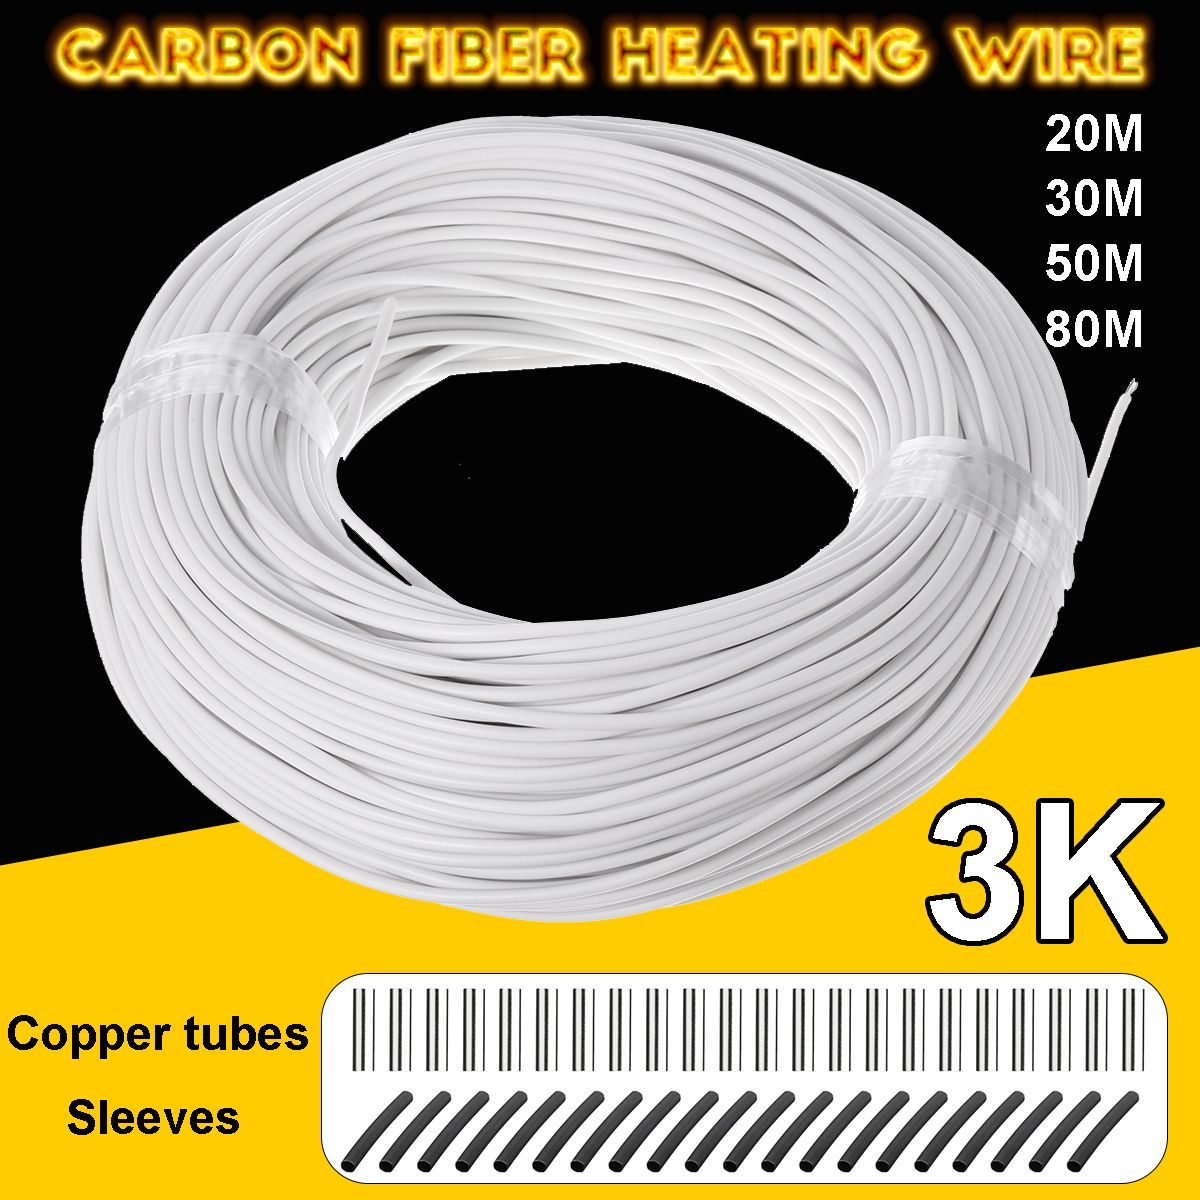 Silicone-Rubber-Carbon-Fiber-Heating-Cable-Heating-Wire-Special-Heating-Cable-1698457